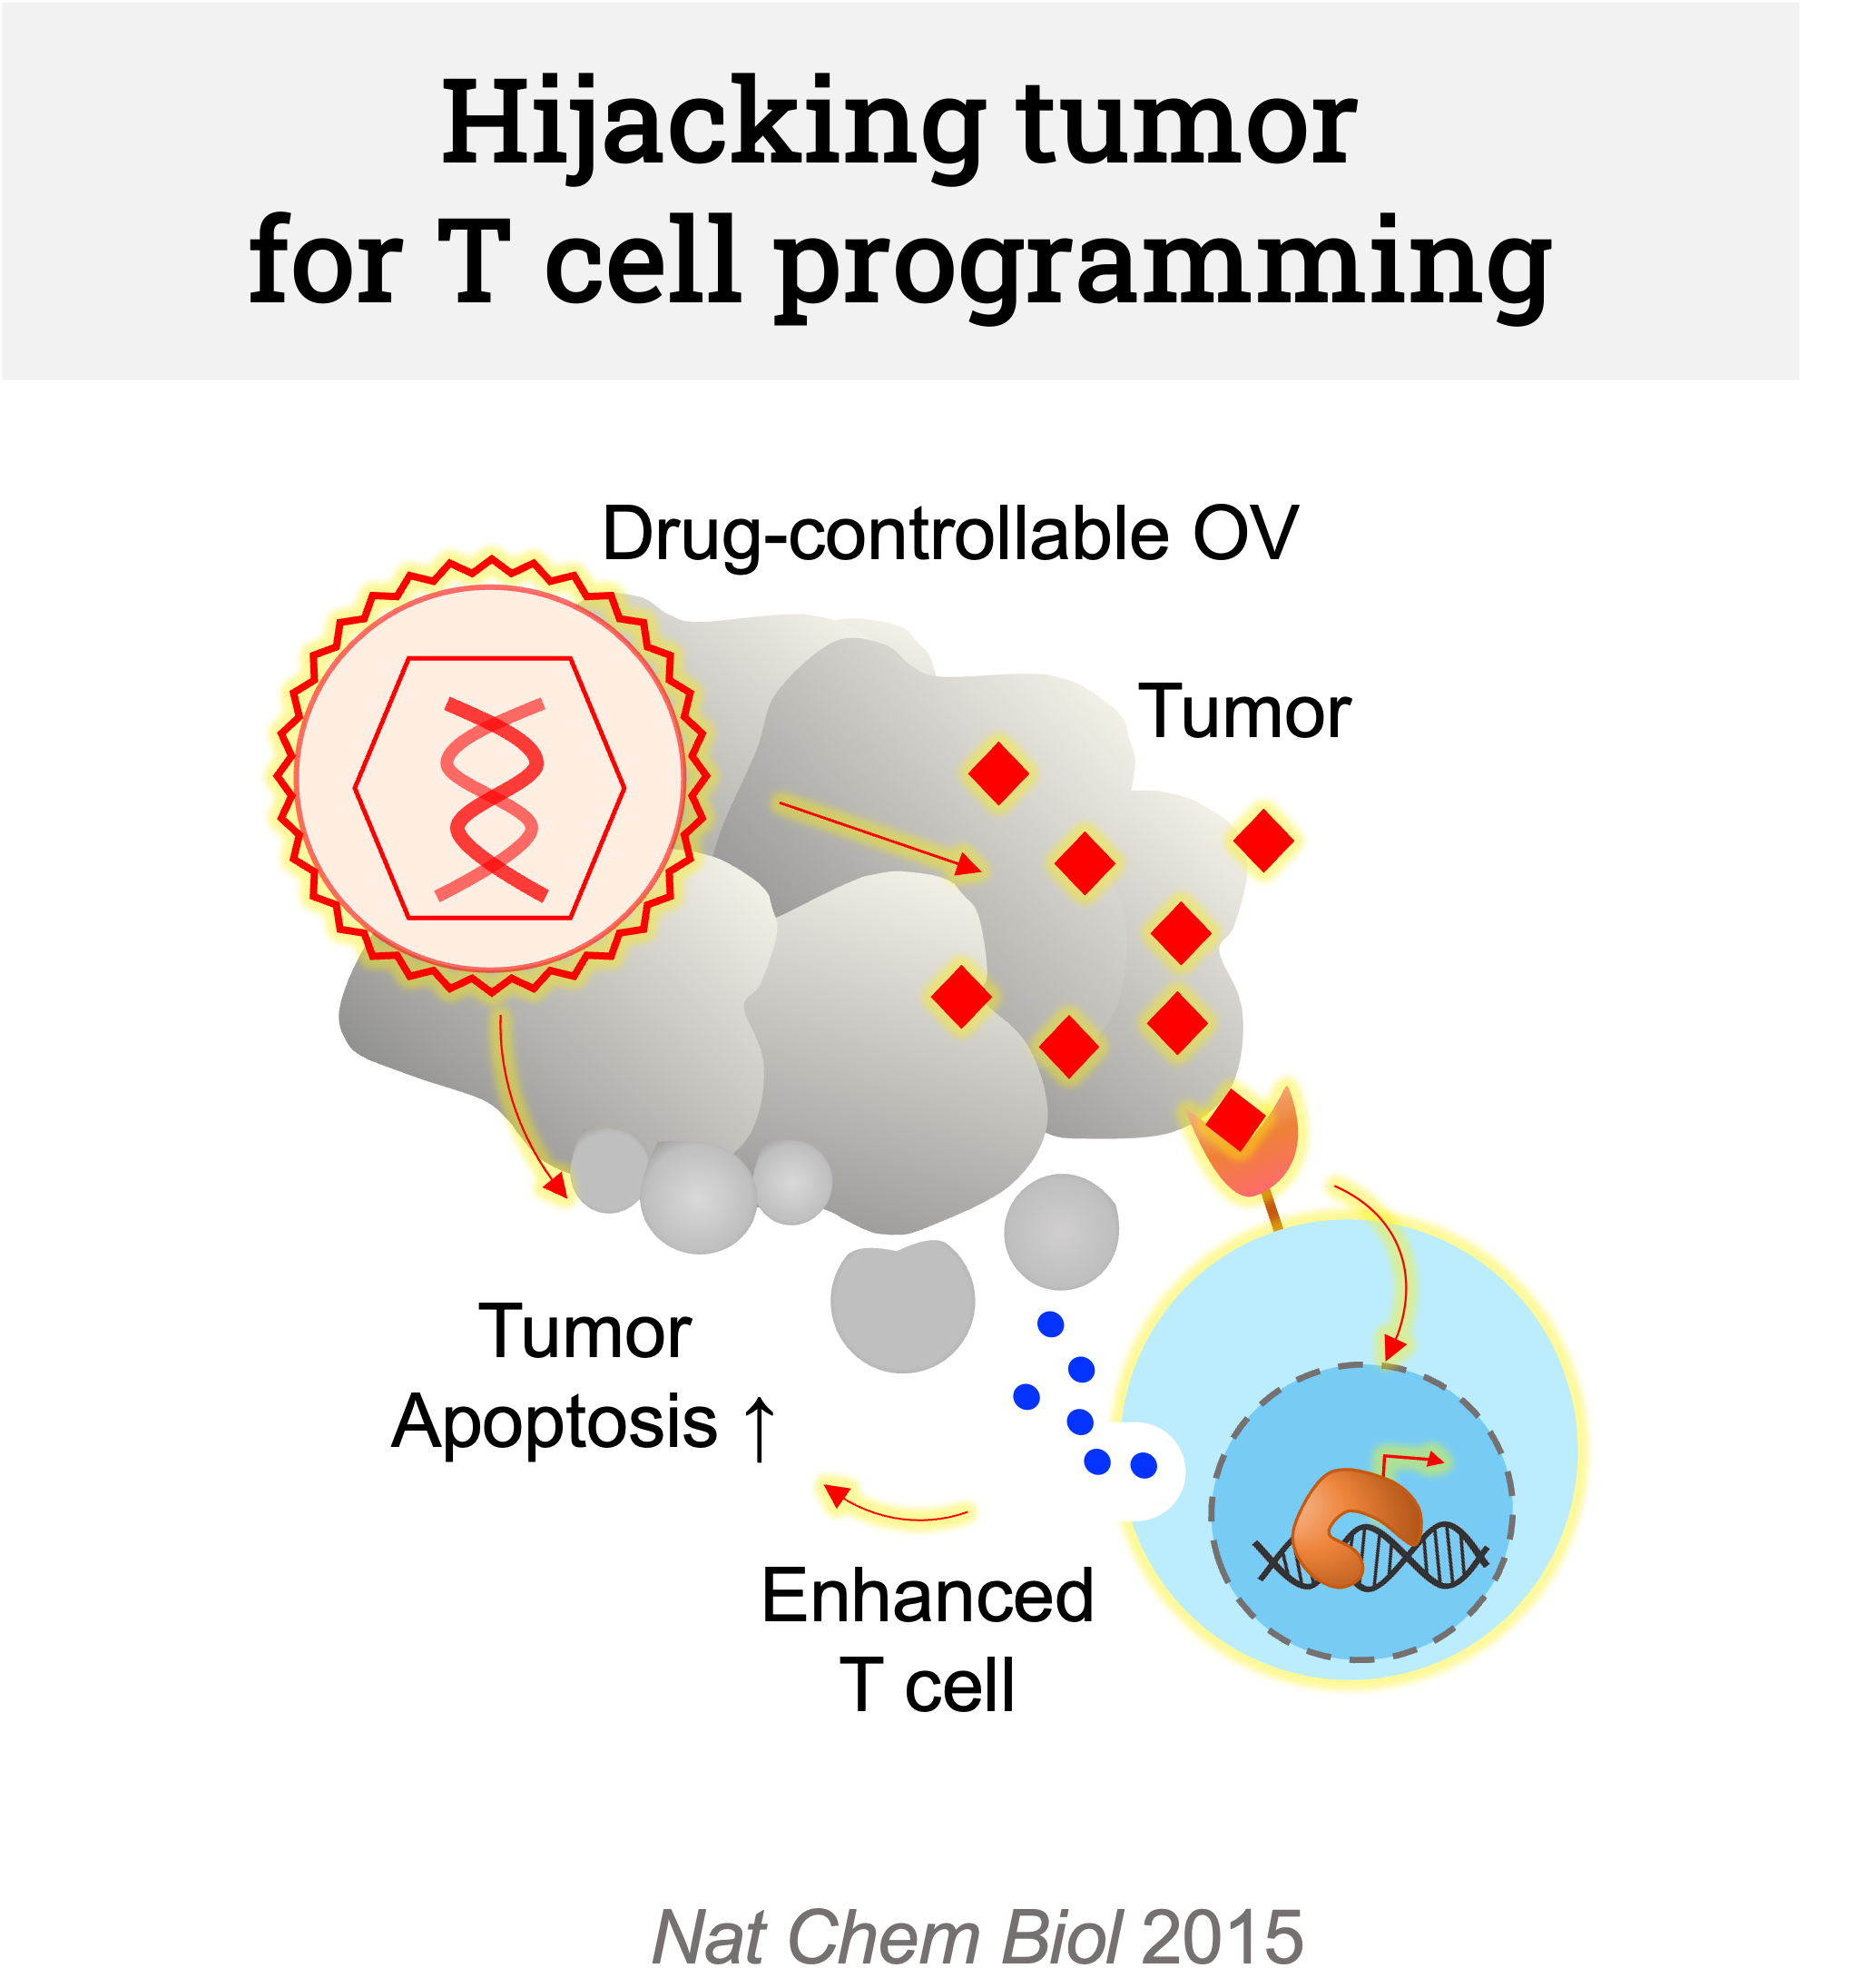 Hijacking tumor for T cell programming. Scientific illustration showing an oncolytic virus hijacking a tumor so that the virus, paired with enhanced T cells, will kill the tumor.